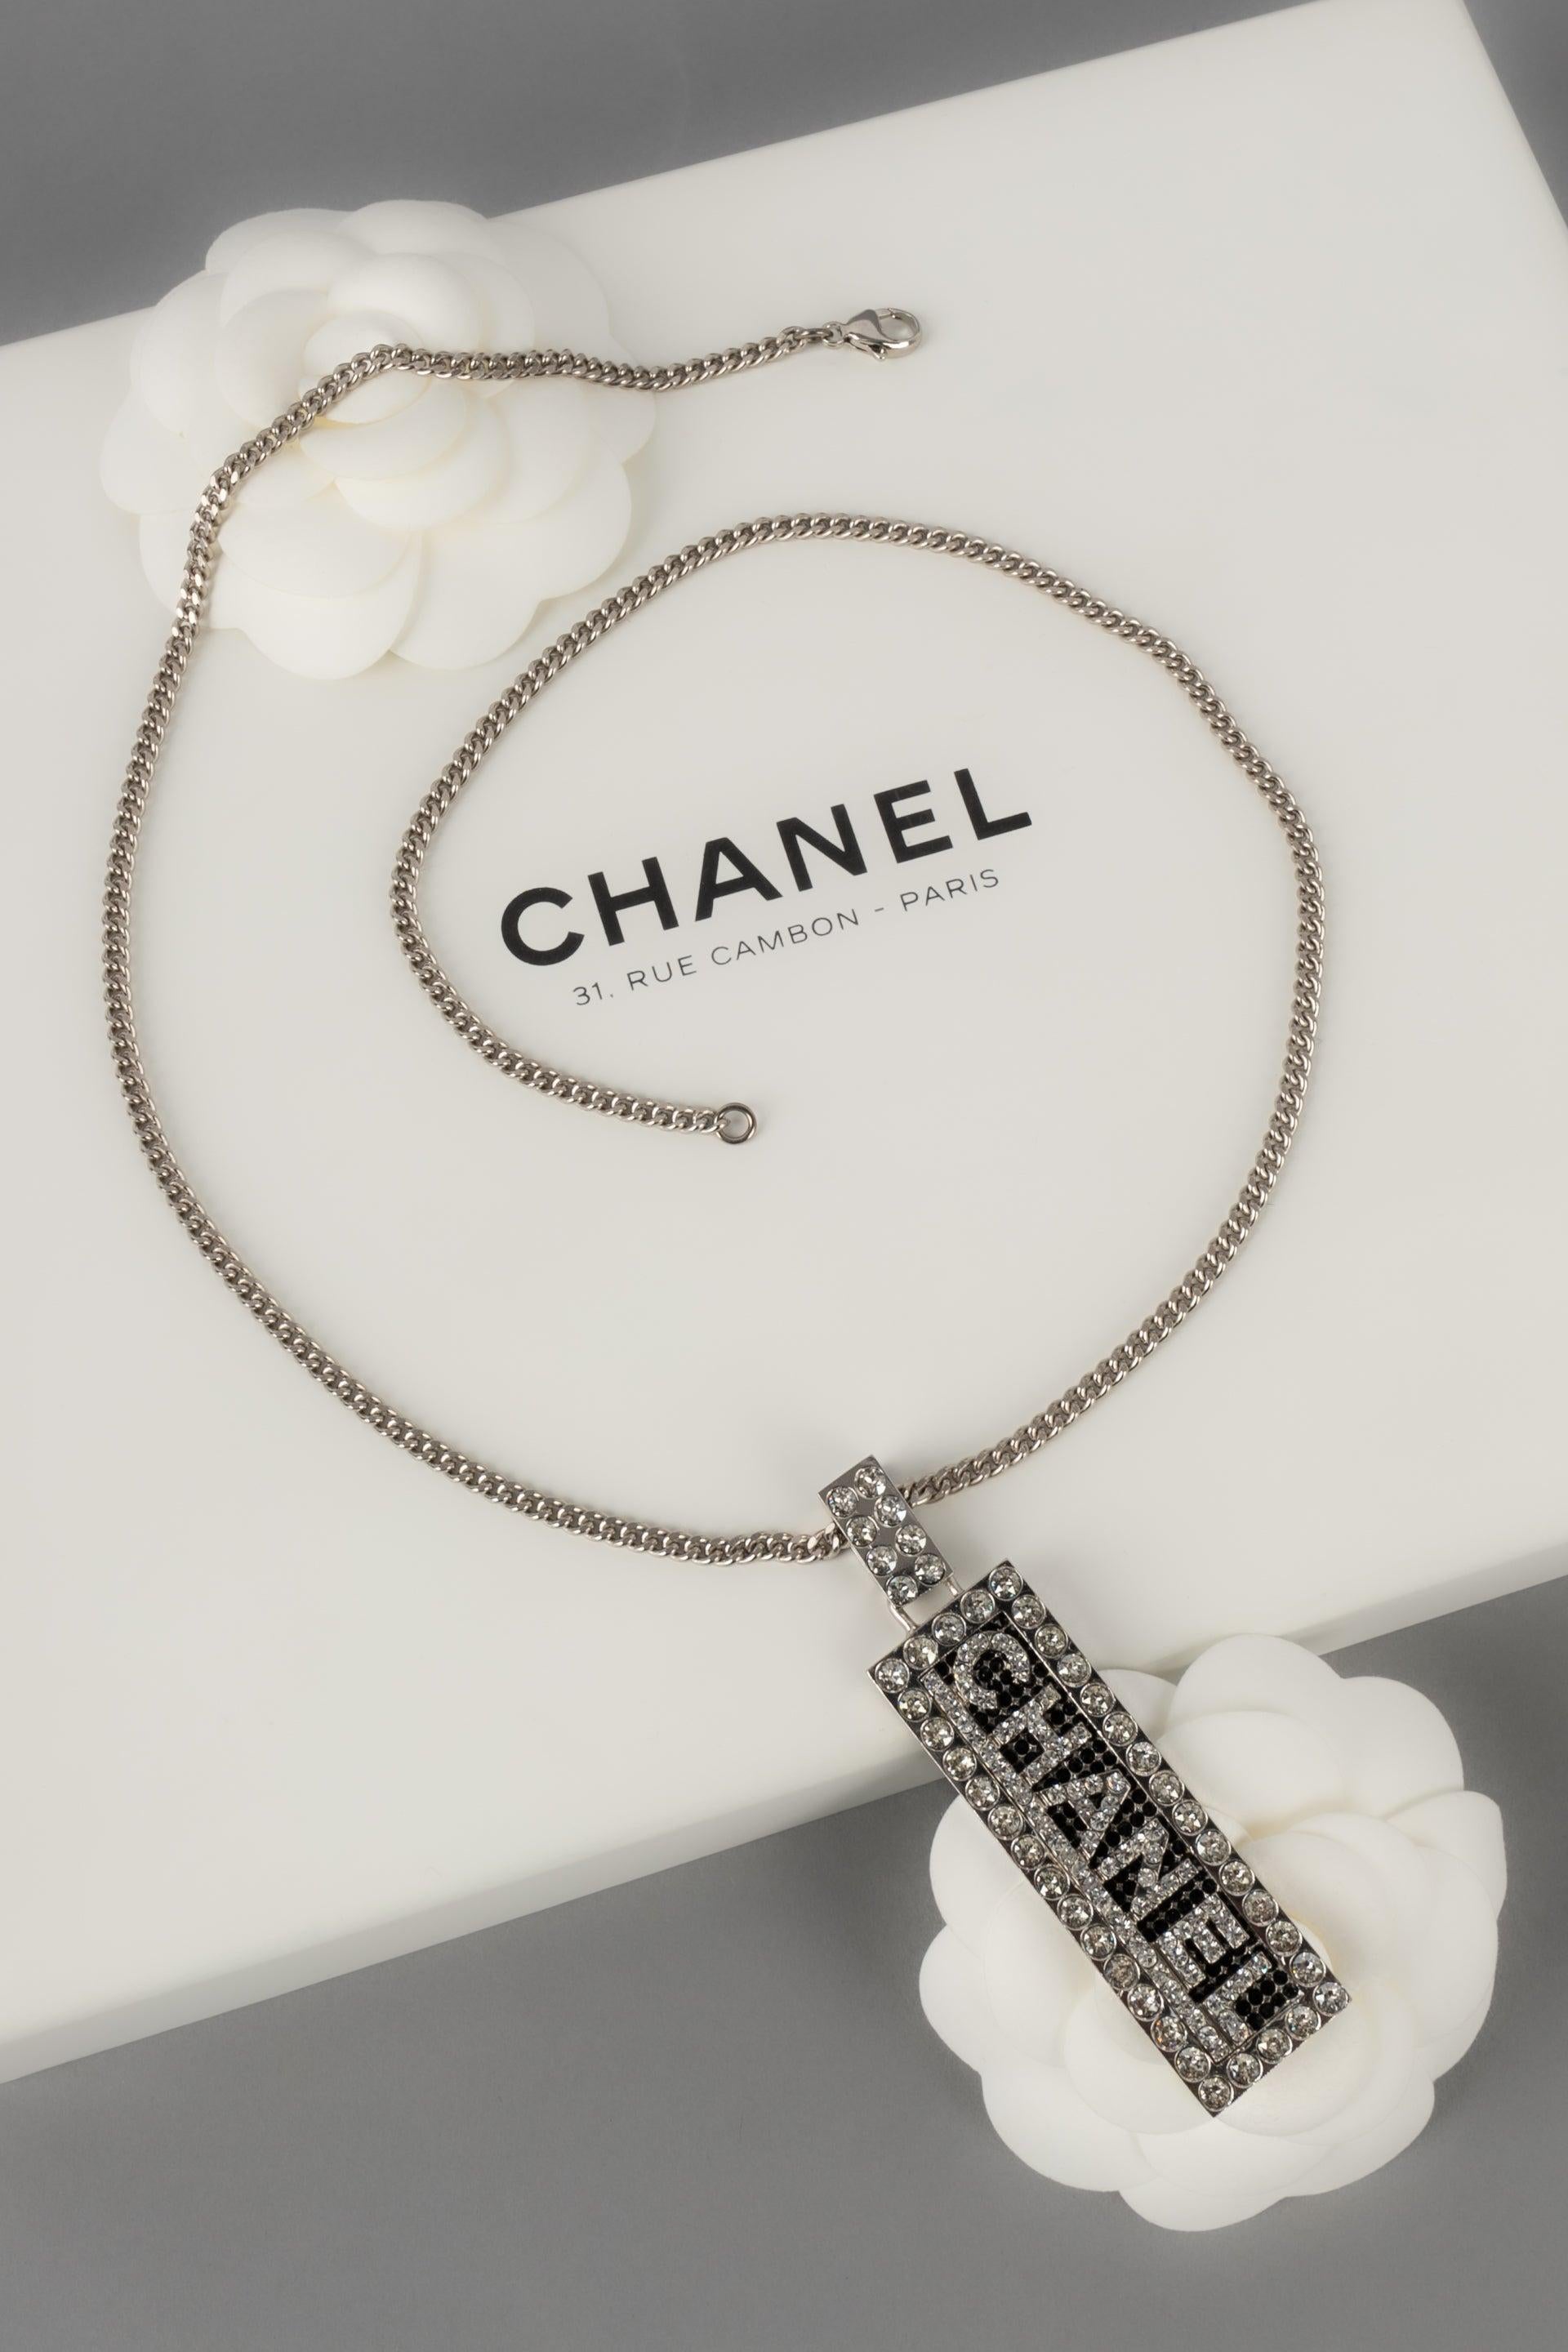 Chanel Silvery Metal Necklace with a Swarovski Rhinestone Pendant, Fall 2003 For Sale 4